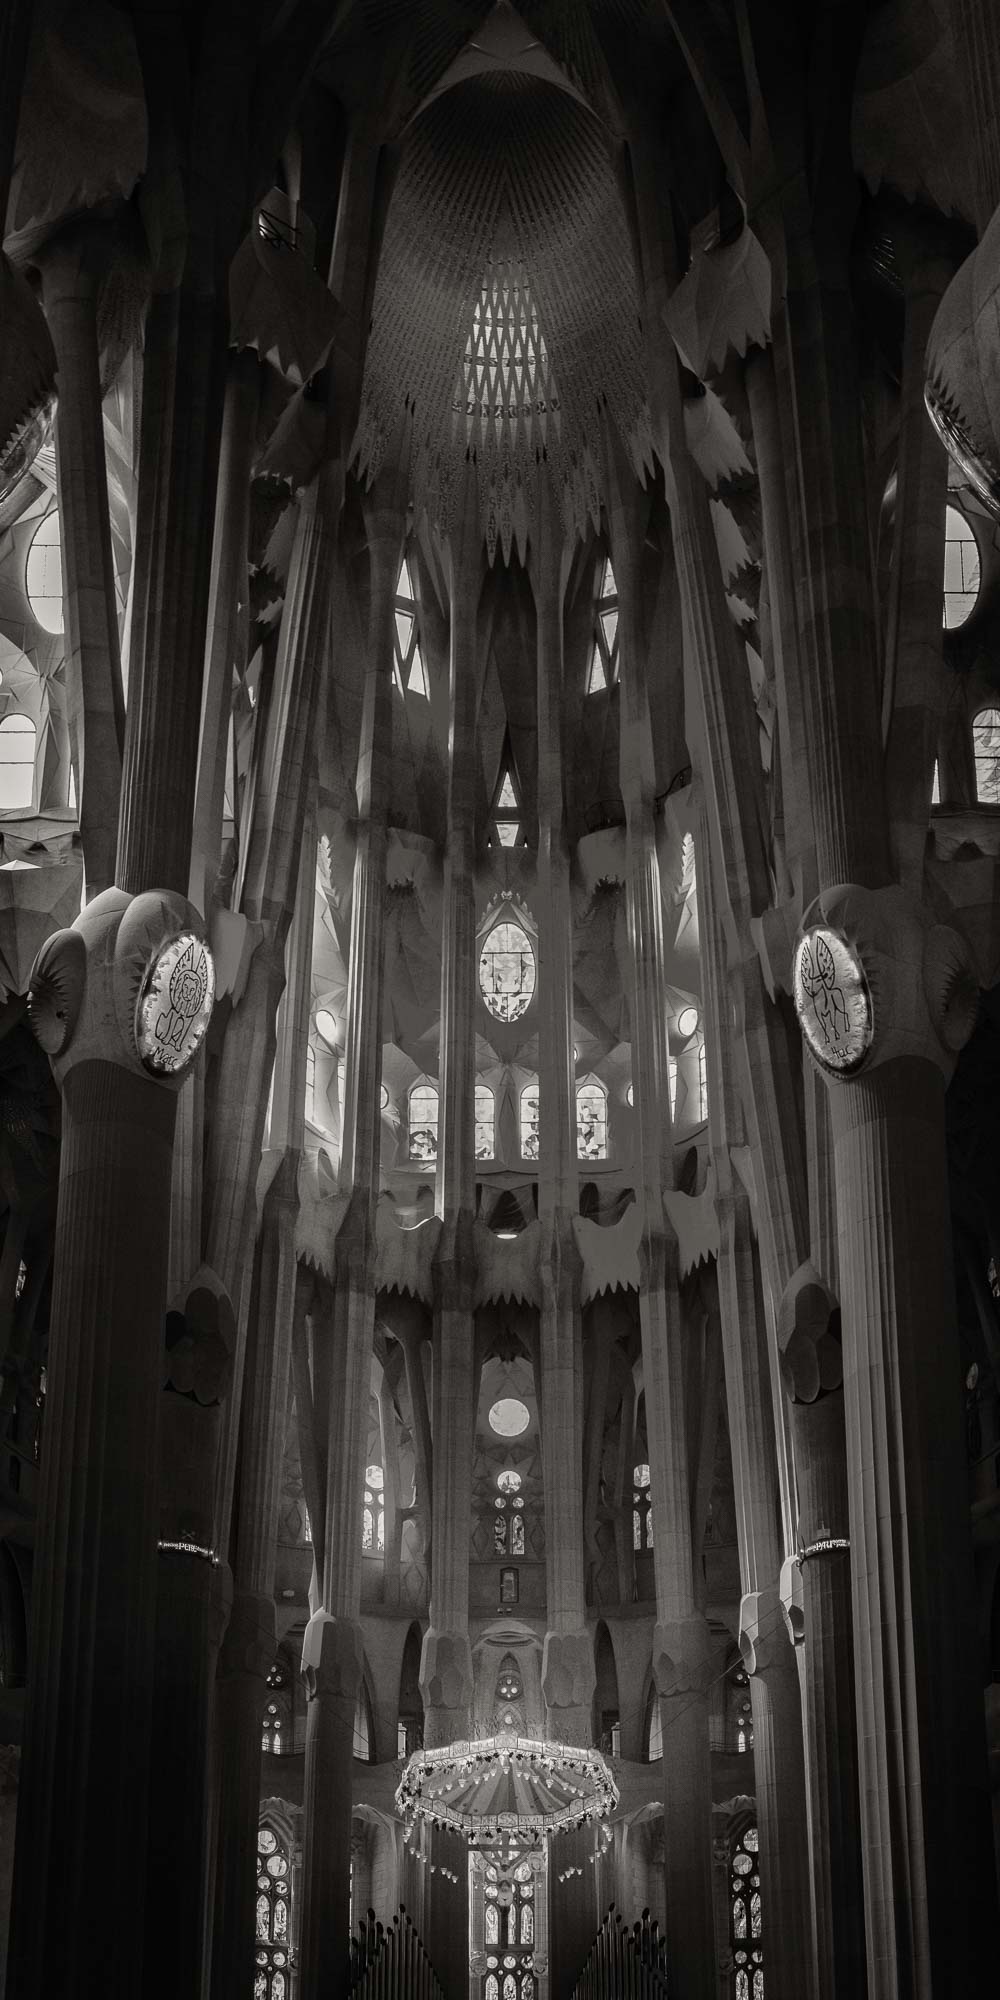 "Black and white interior view of La Sagrada Familia's columns and ceiling details, capturing the play of light and shadow."